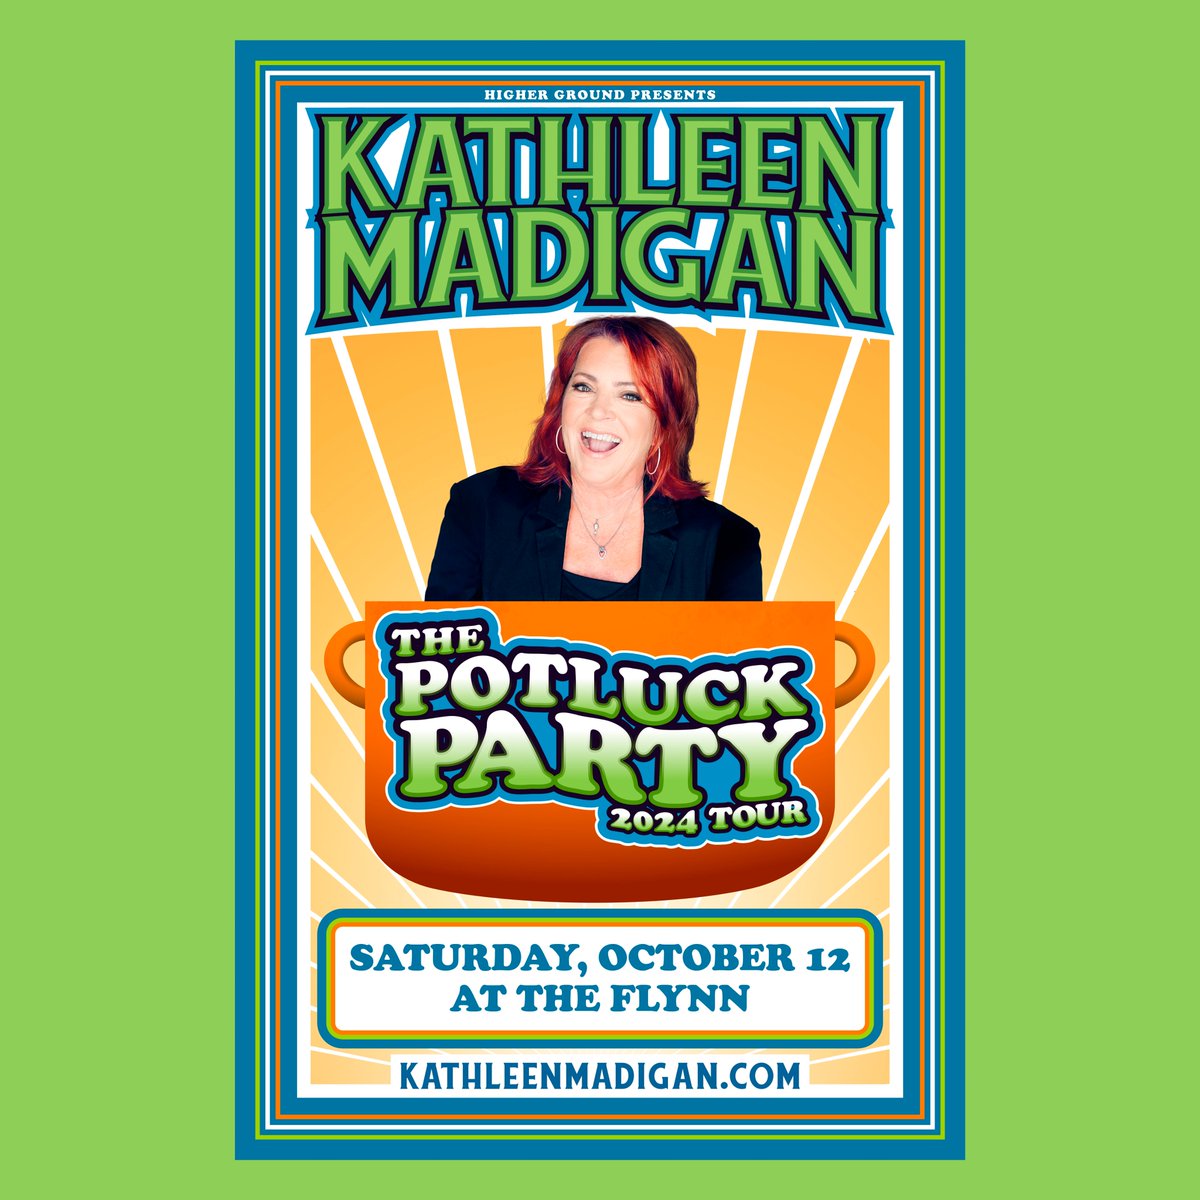 ON SALE NOW: Don't miss @kathleenmadigan at the @flynnbtv on October 12! 🎫 bit.ly/POTLUCKPARTY